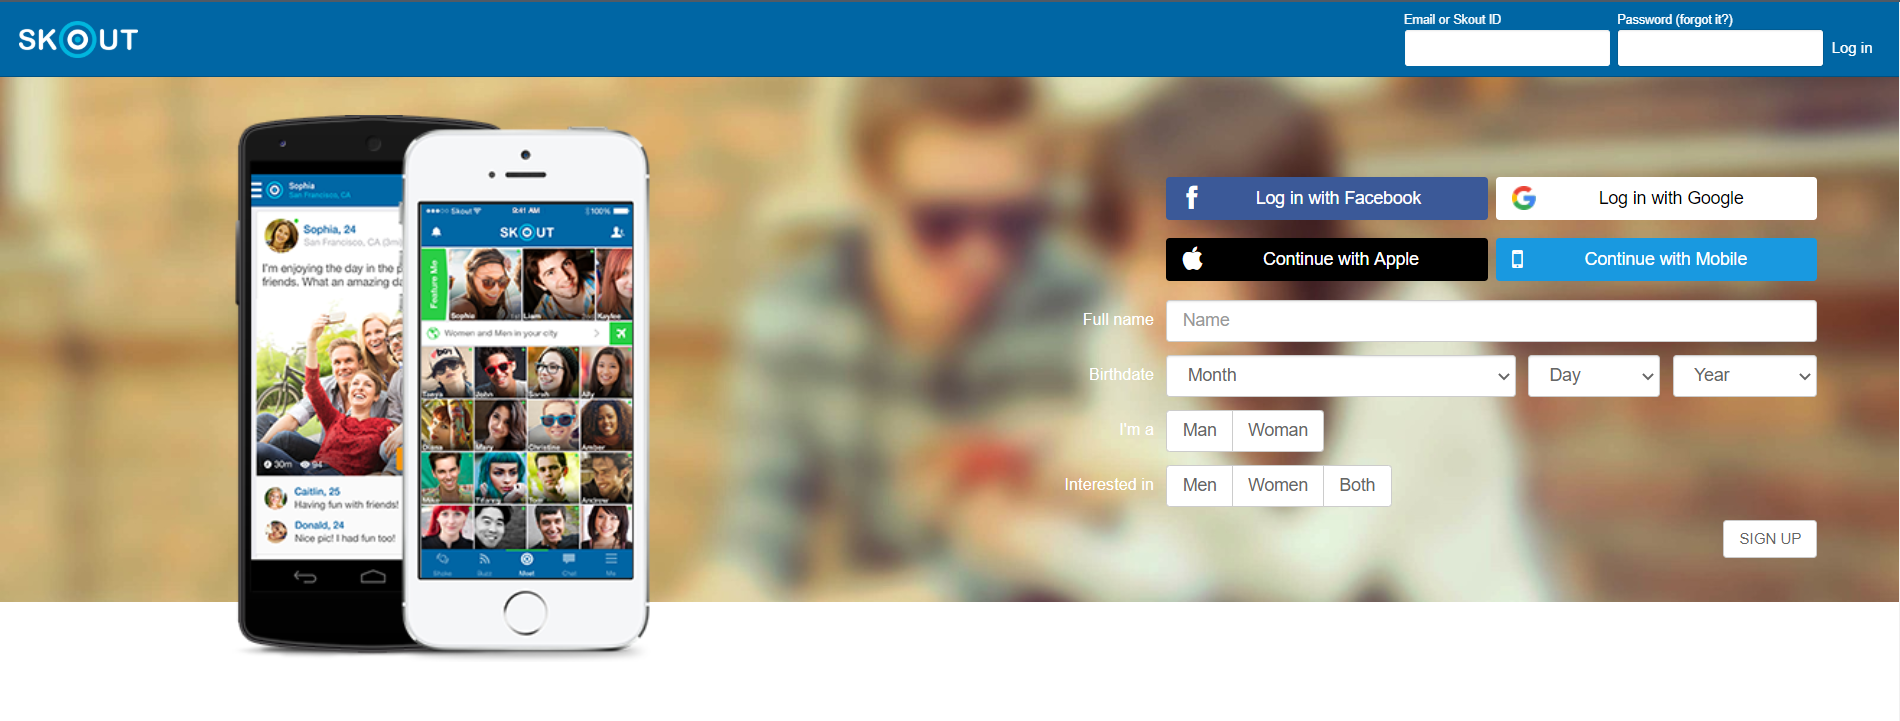 How do you use skout?